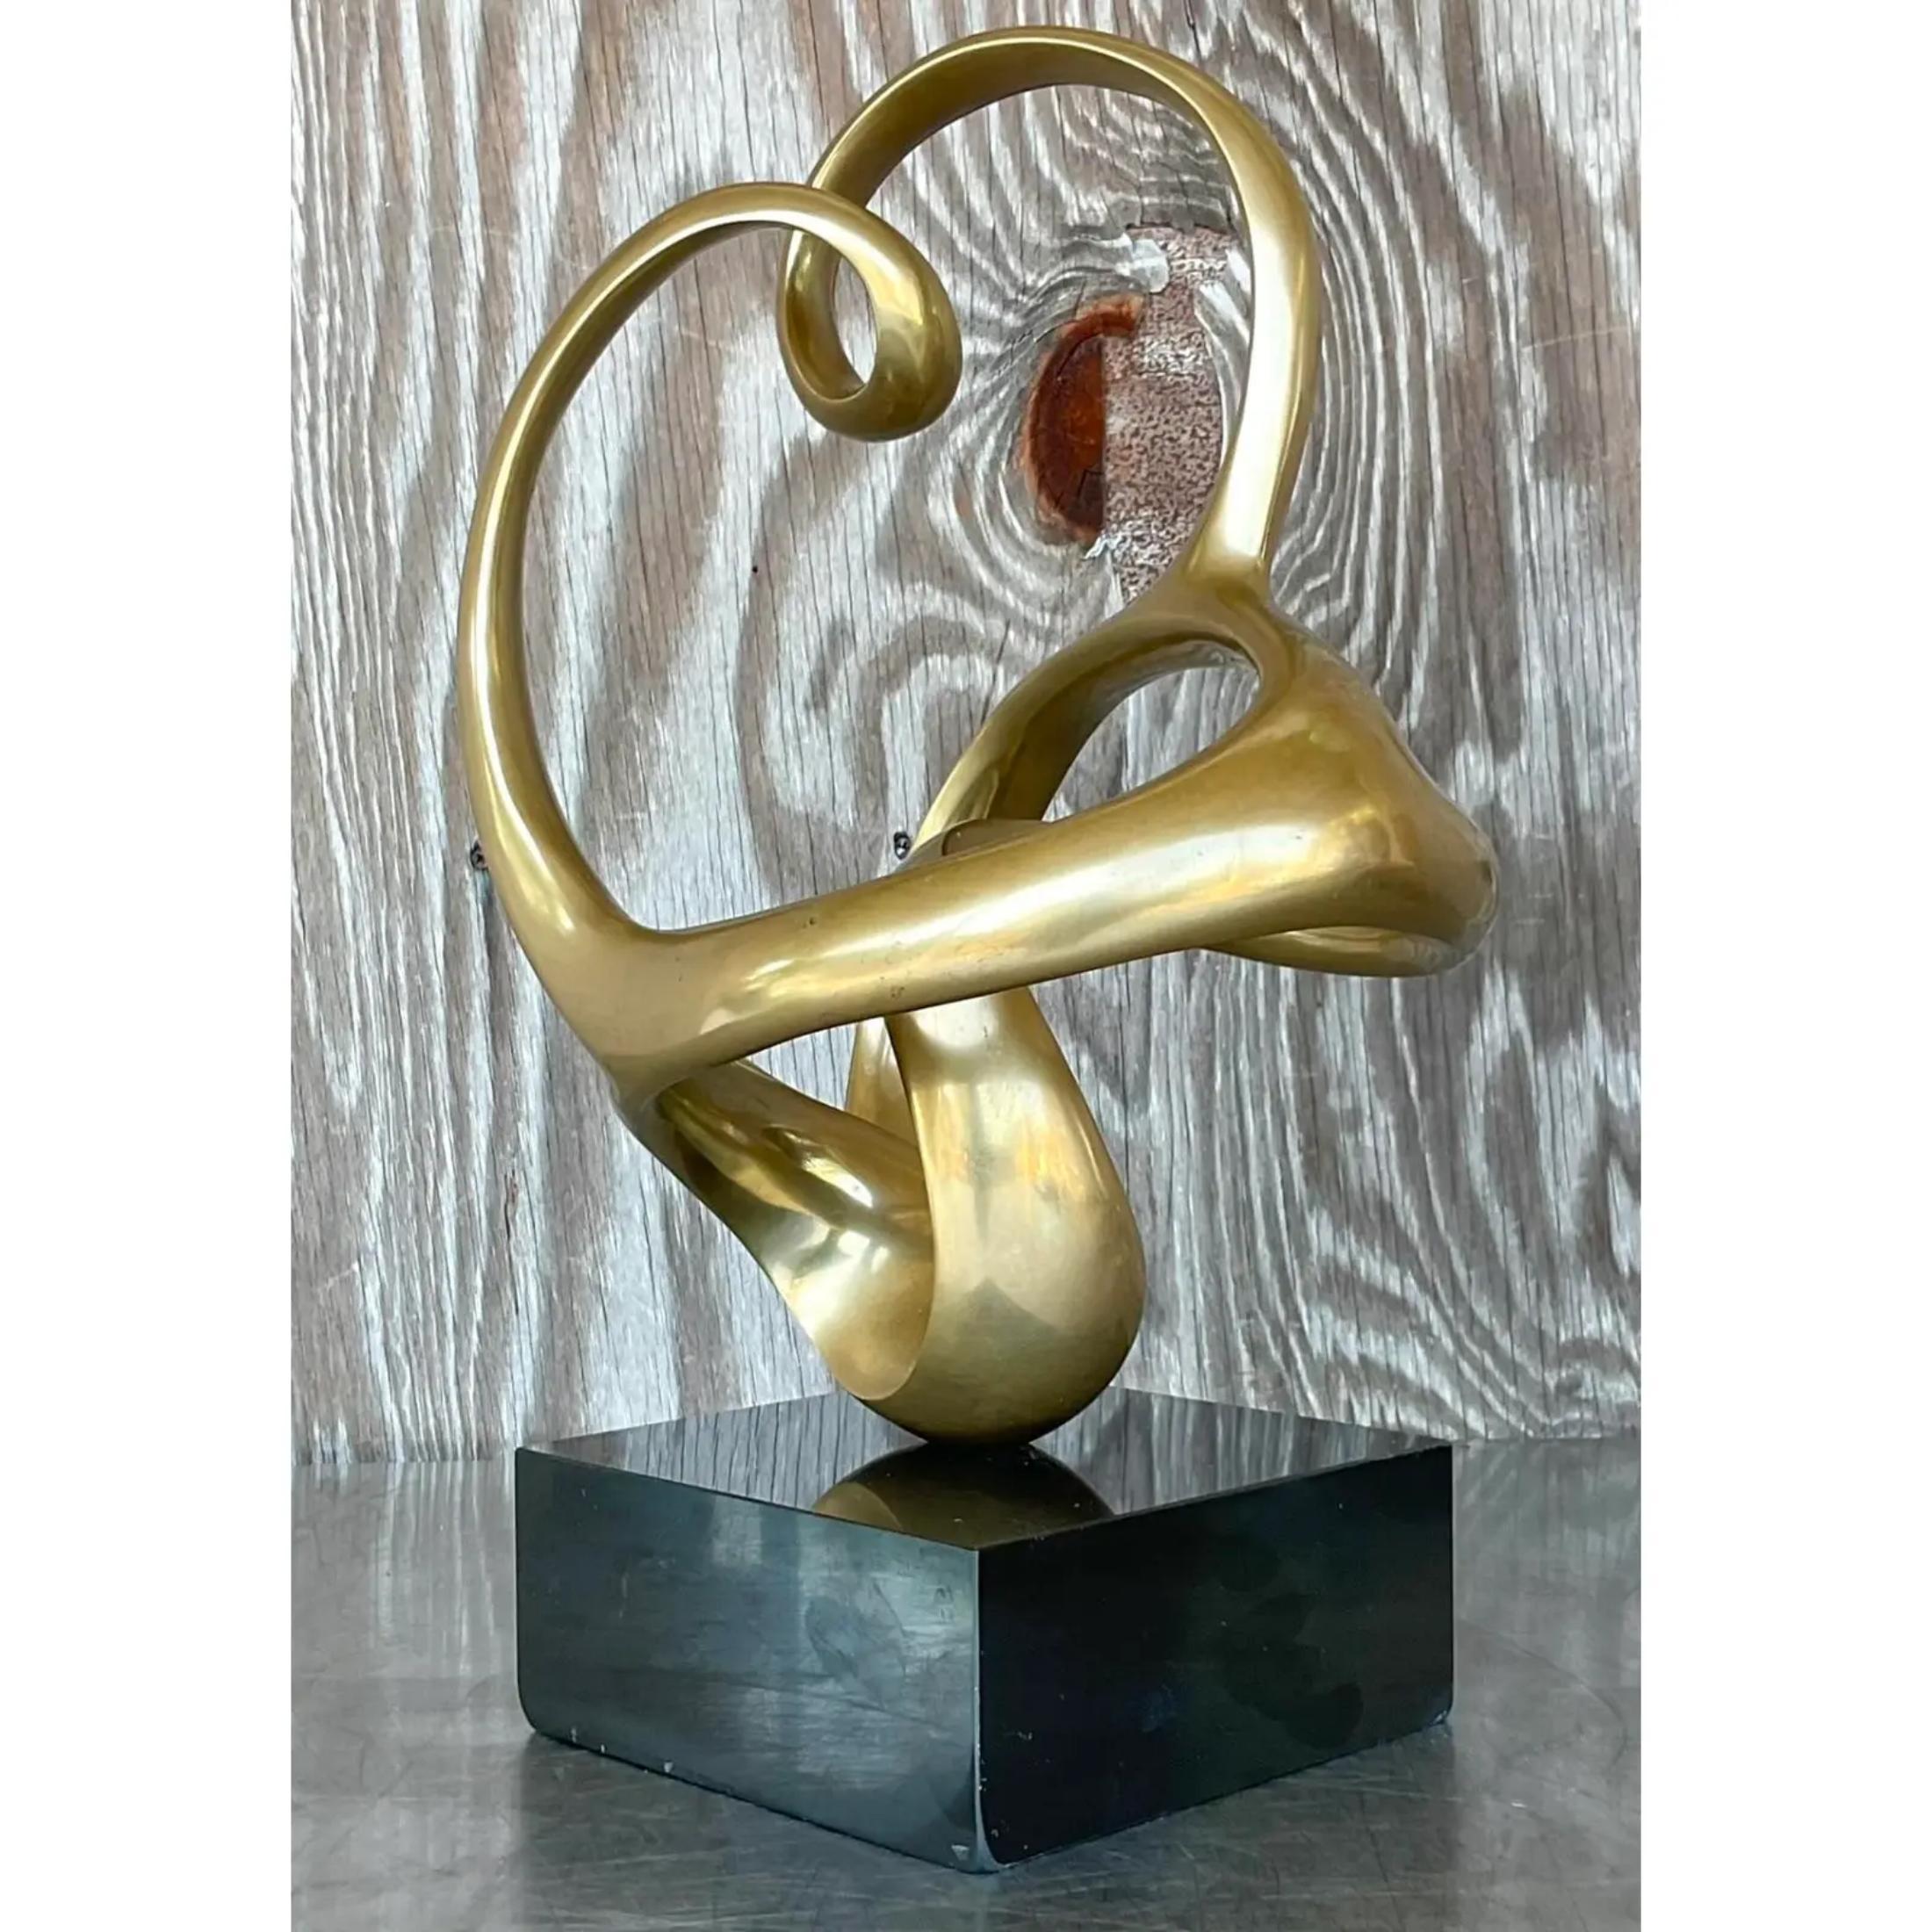 A stunning vintage Boho Brass sculpture. A chic Abstract composition forges in brass. Rests on a black wooden plinth. Signed by the artist. Acquired from a Palm Beach estate.